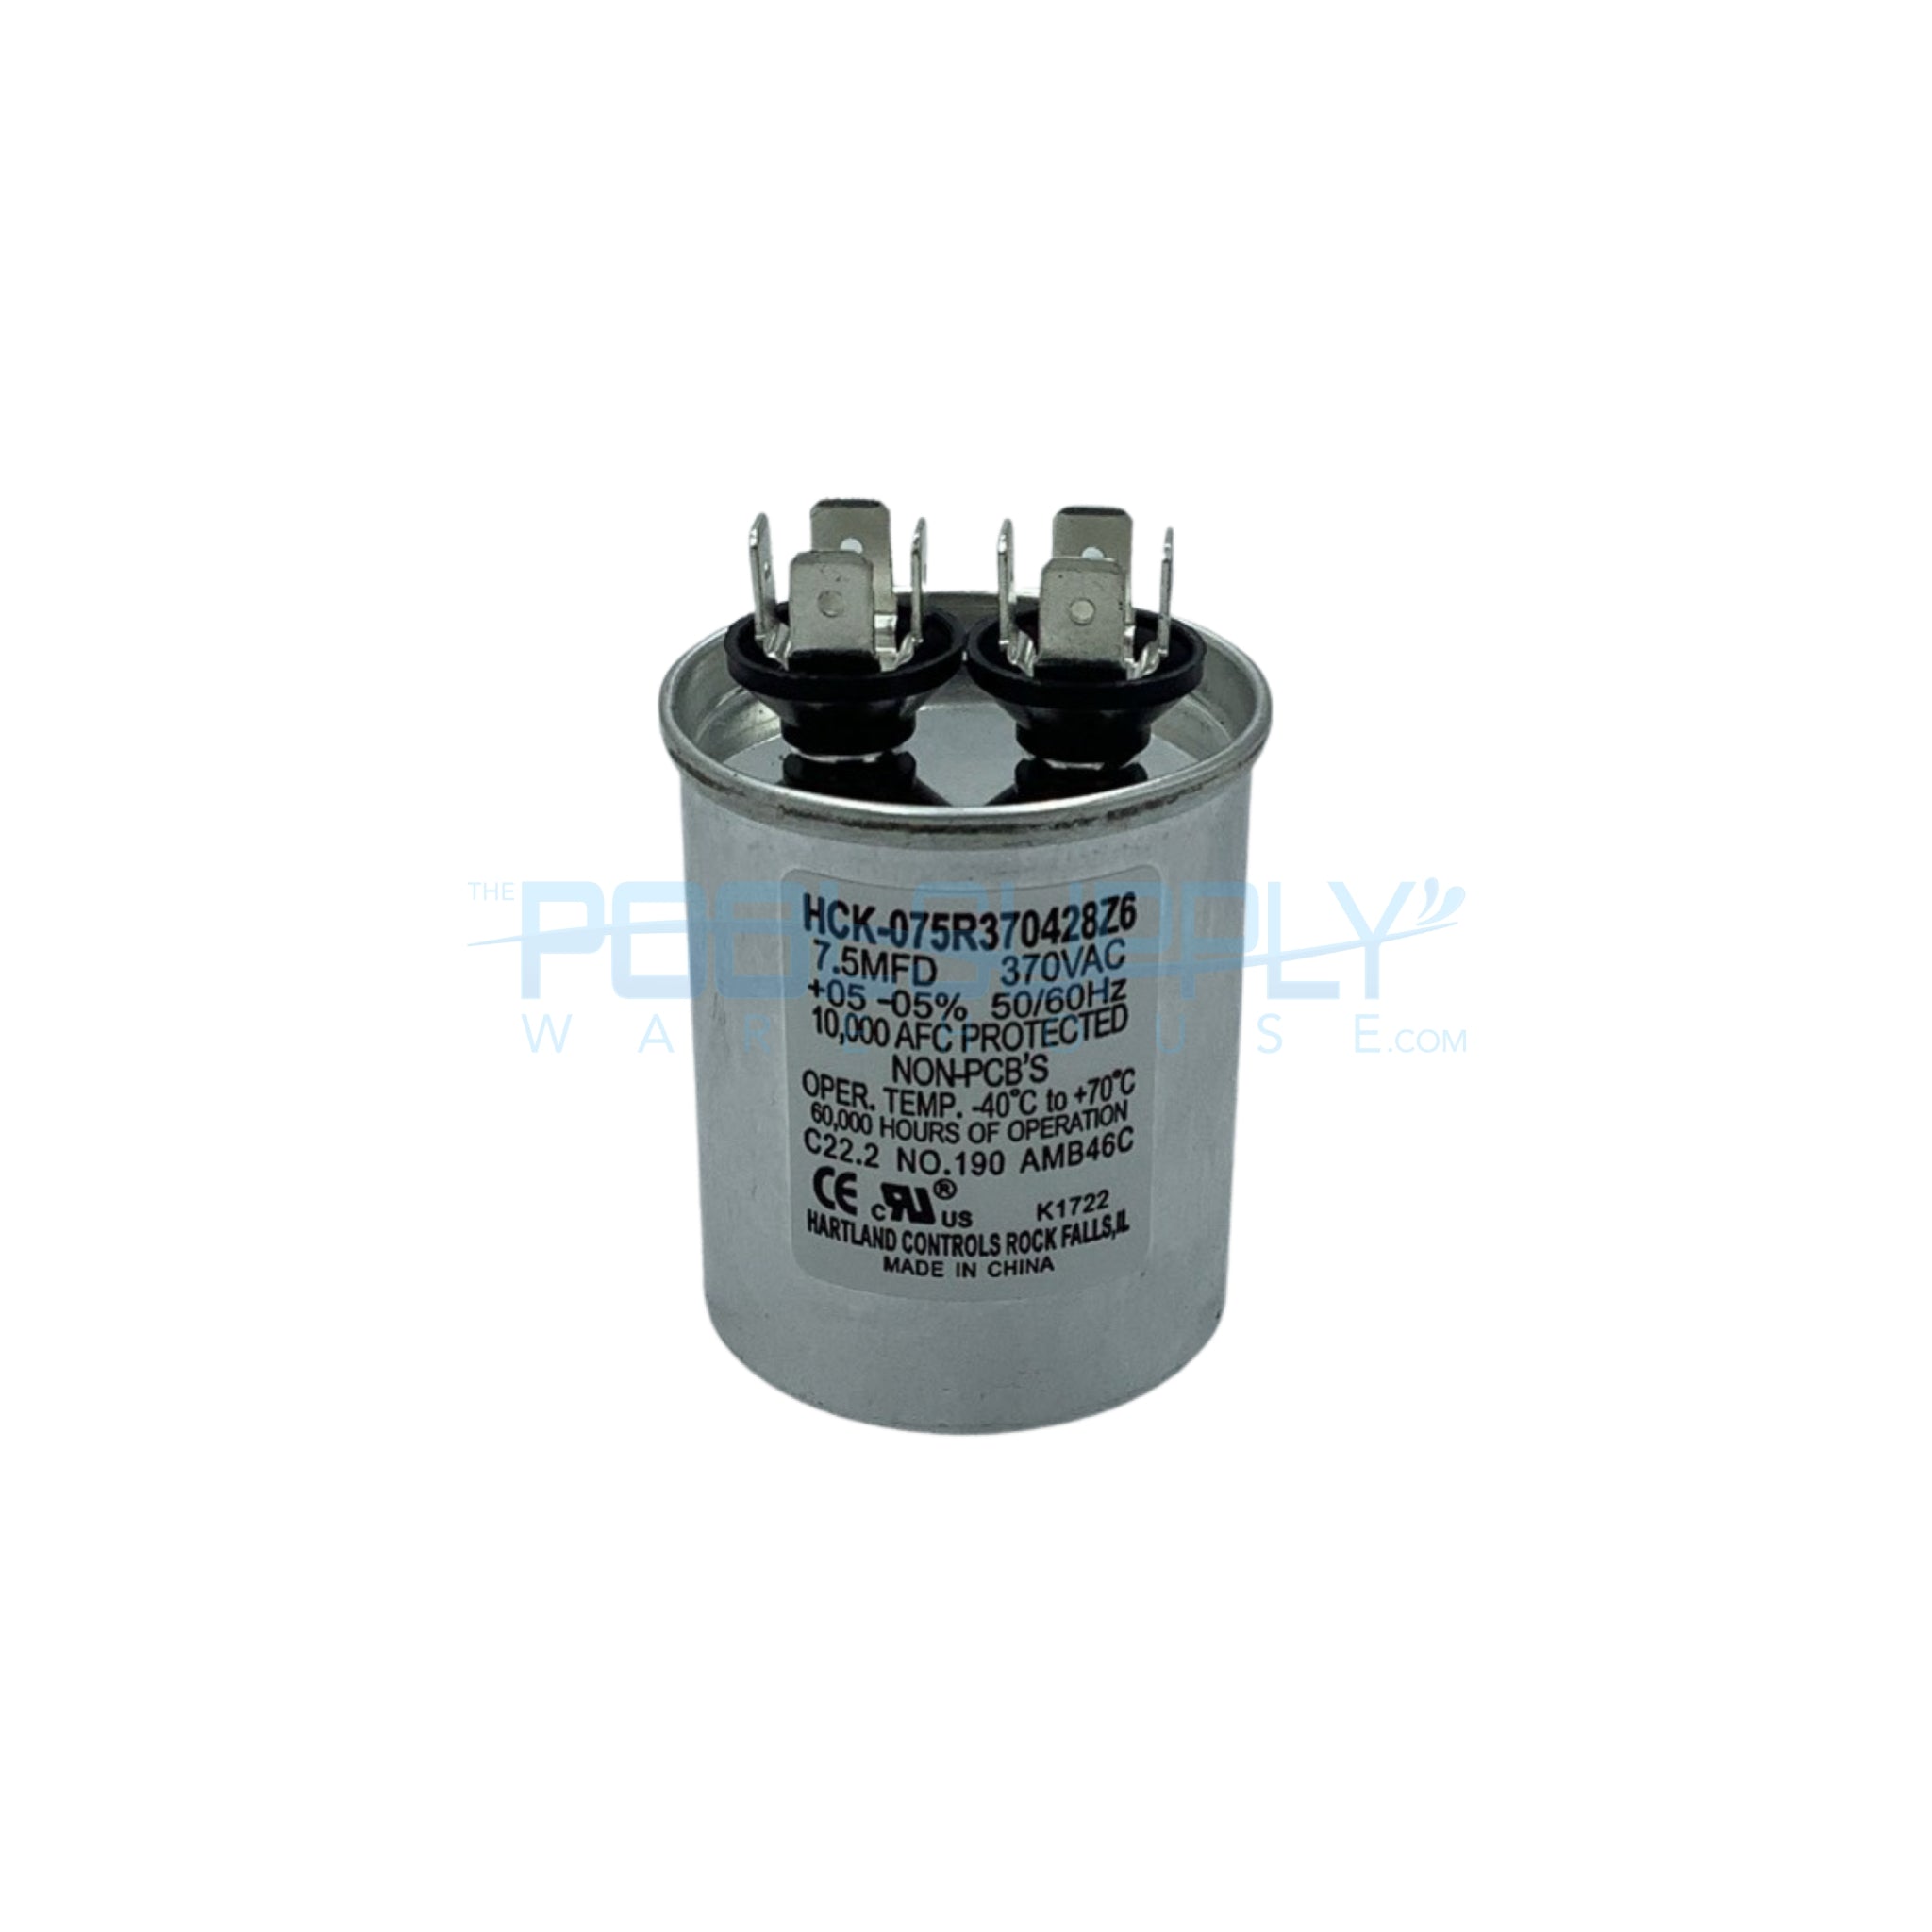 Hartland Controls Round Run Capacitor - HCK-075R370428Z6 - The Pool Supply Warehouse